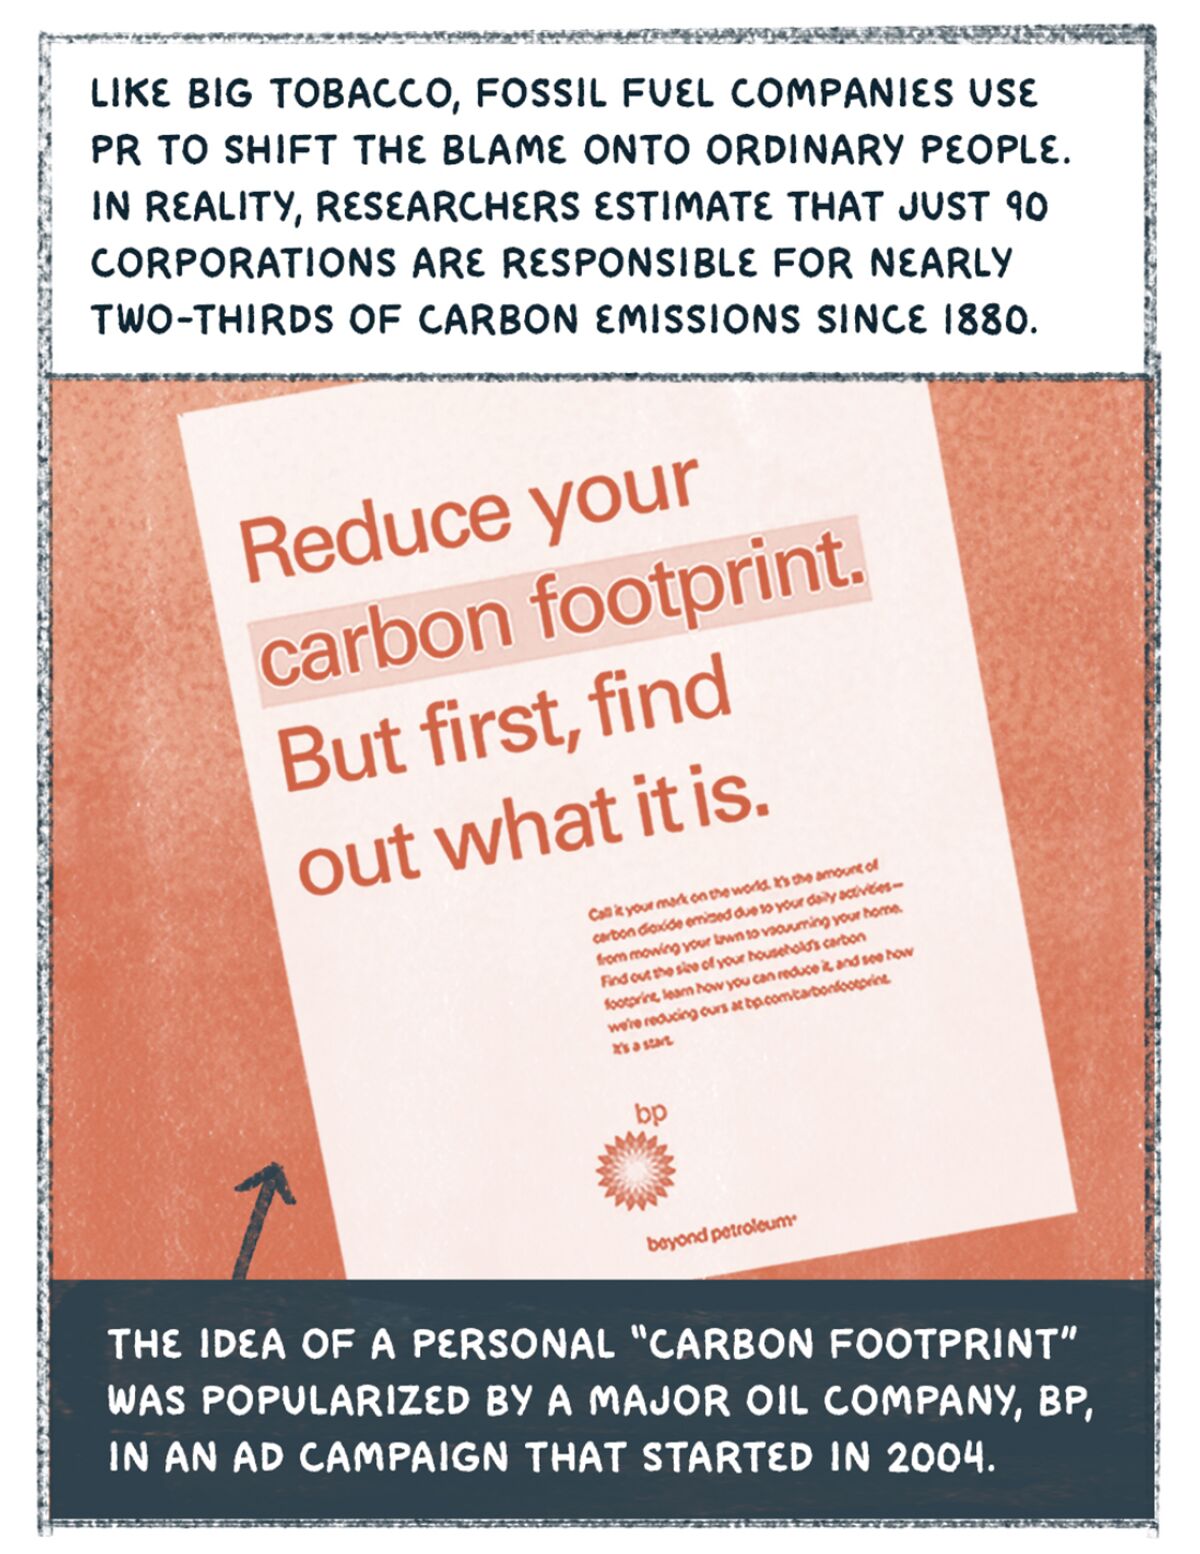 Illustration of a handout that says "Reduce your carbon footprint. But first, find out what it is."